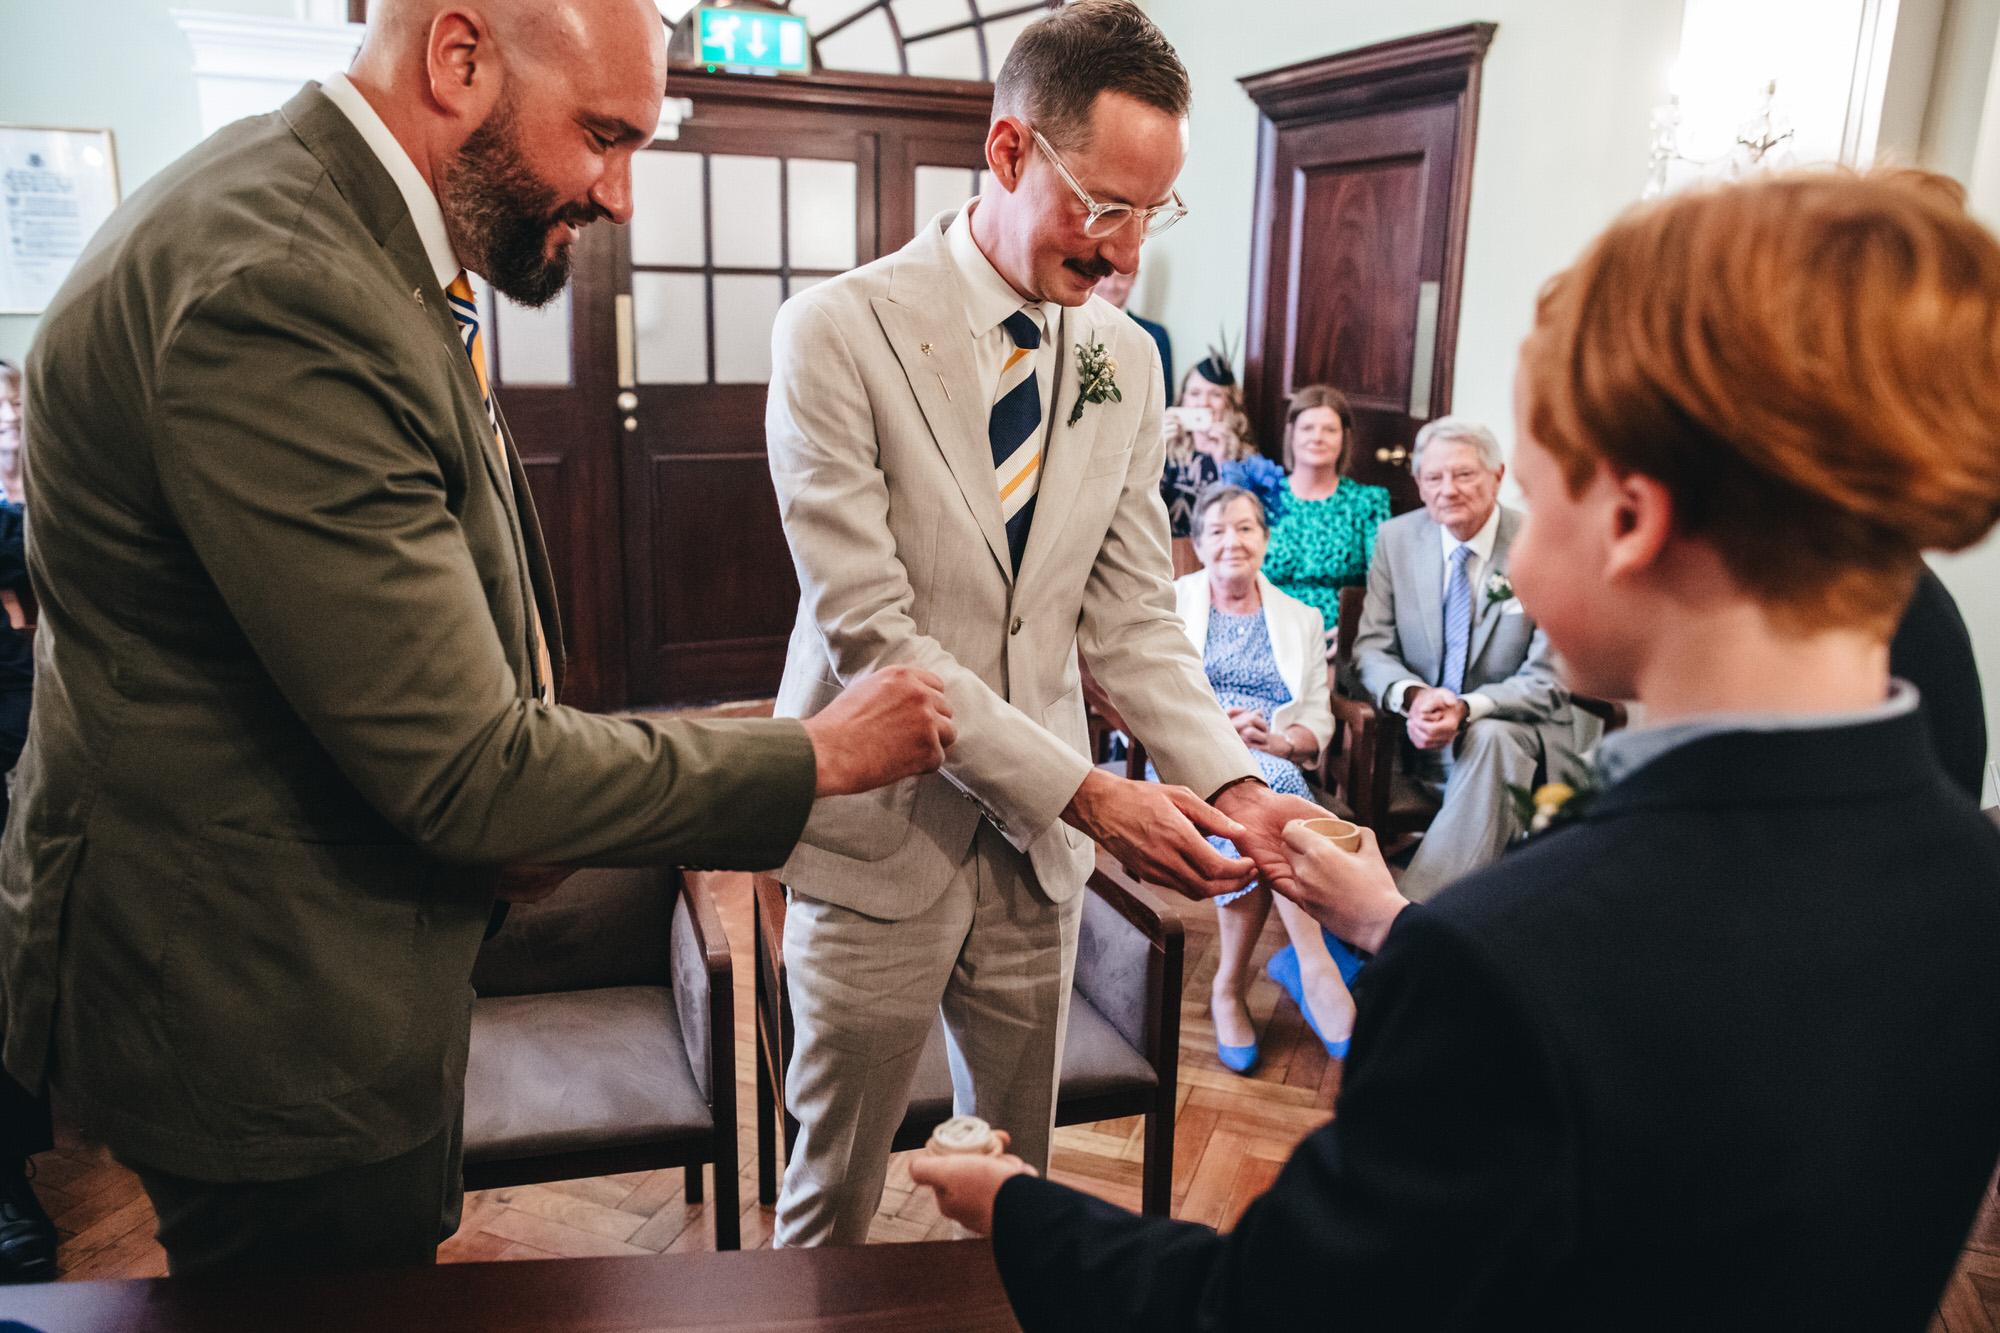 grooms taking wedding rings at Chelsea Old Town Hall wedding